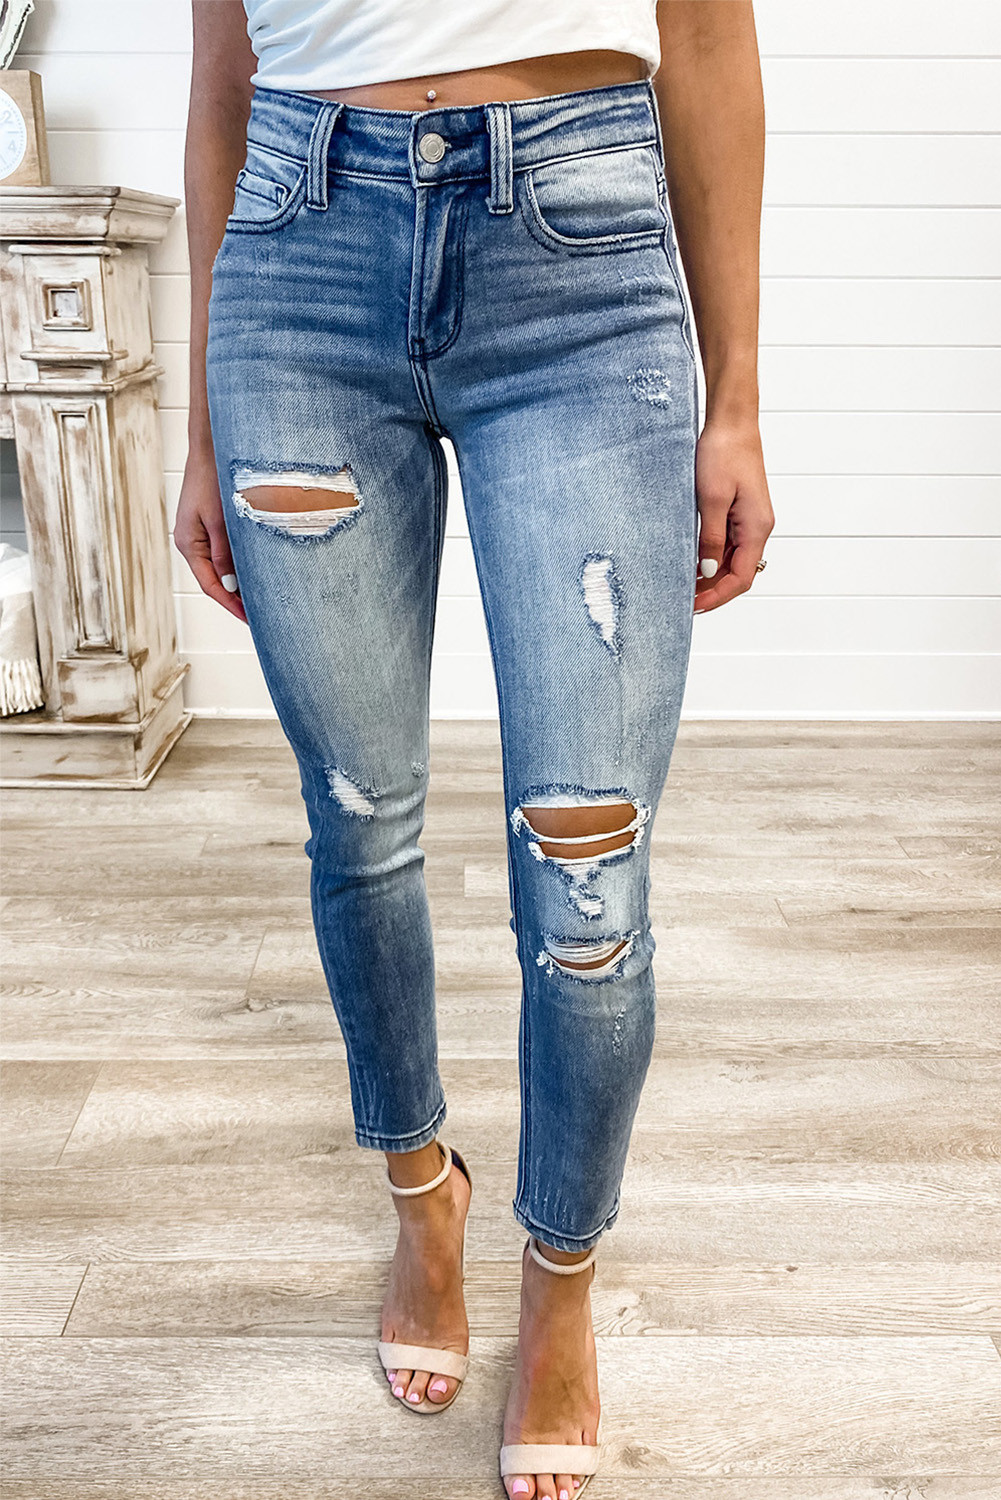 Wholesale Other Category, Cheap Distressed Ankle Skinny Jeans Online